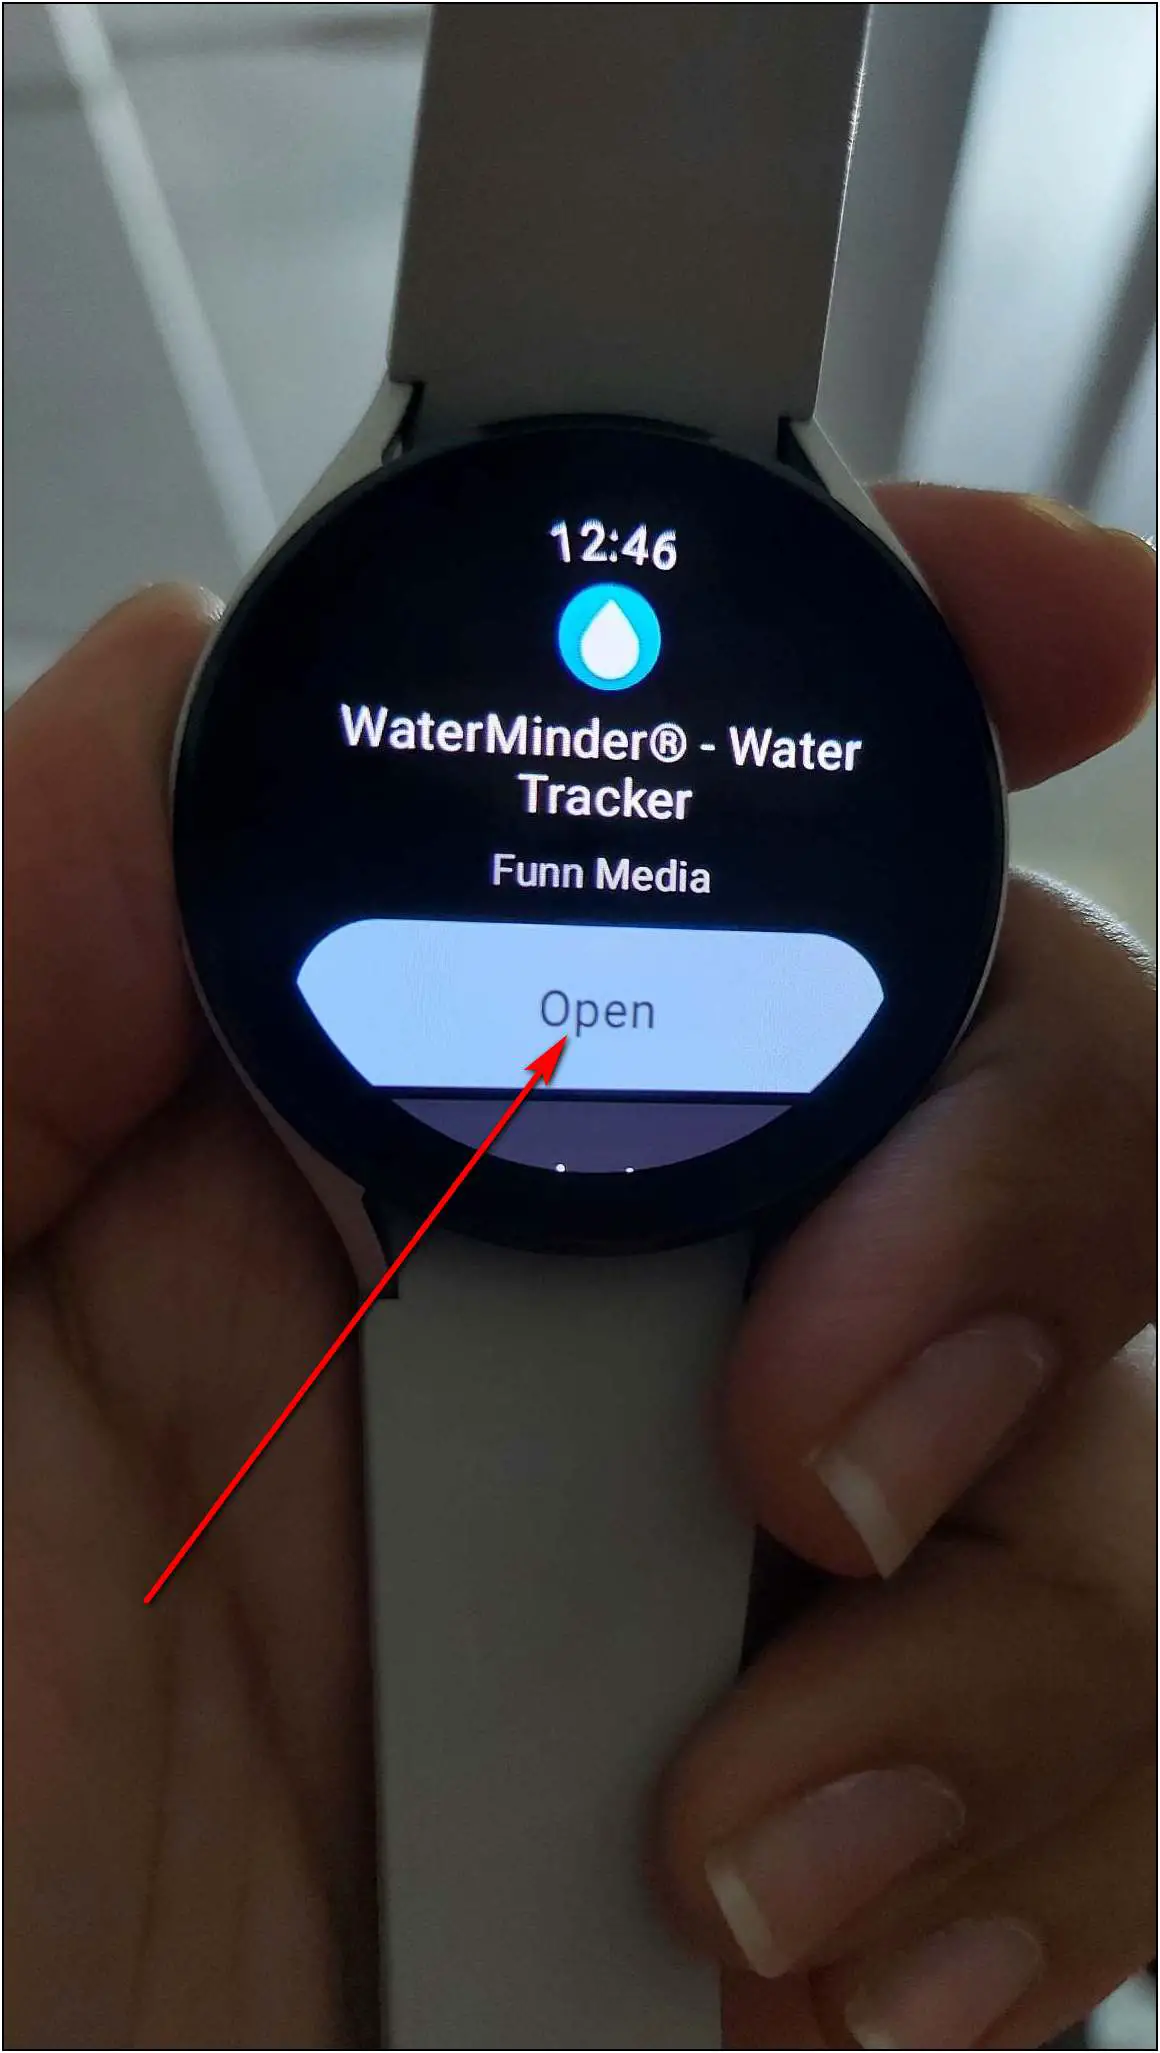 Drink Water Reminders Galaxy Watch 4